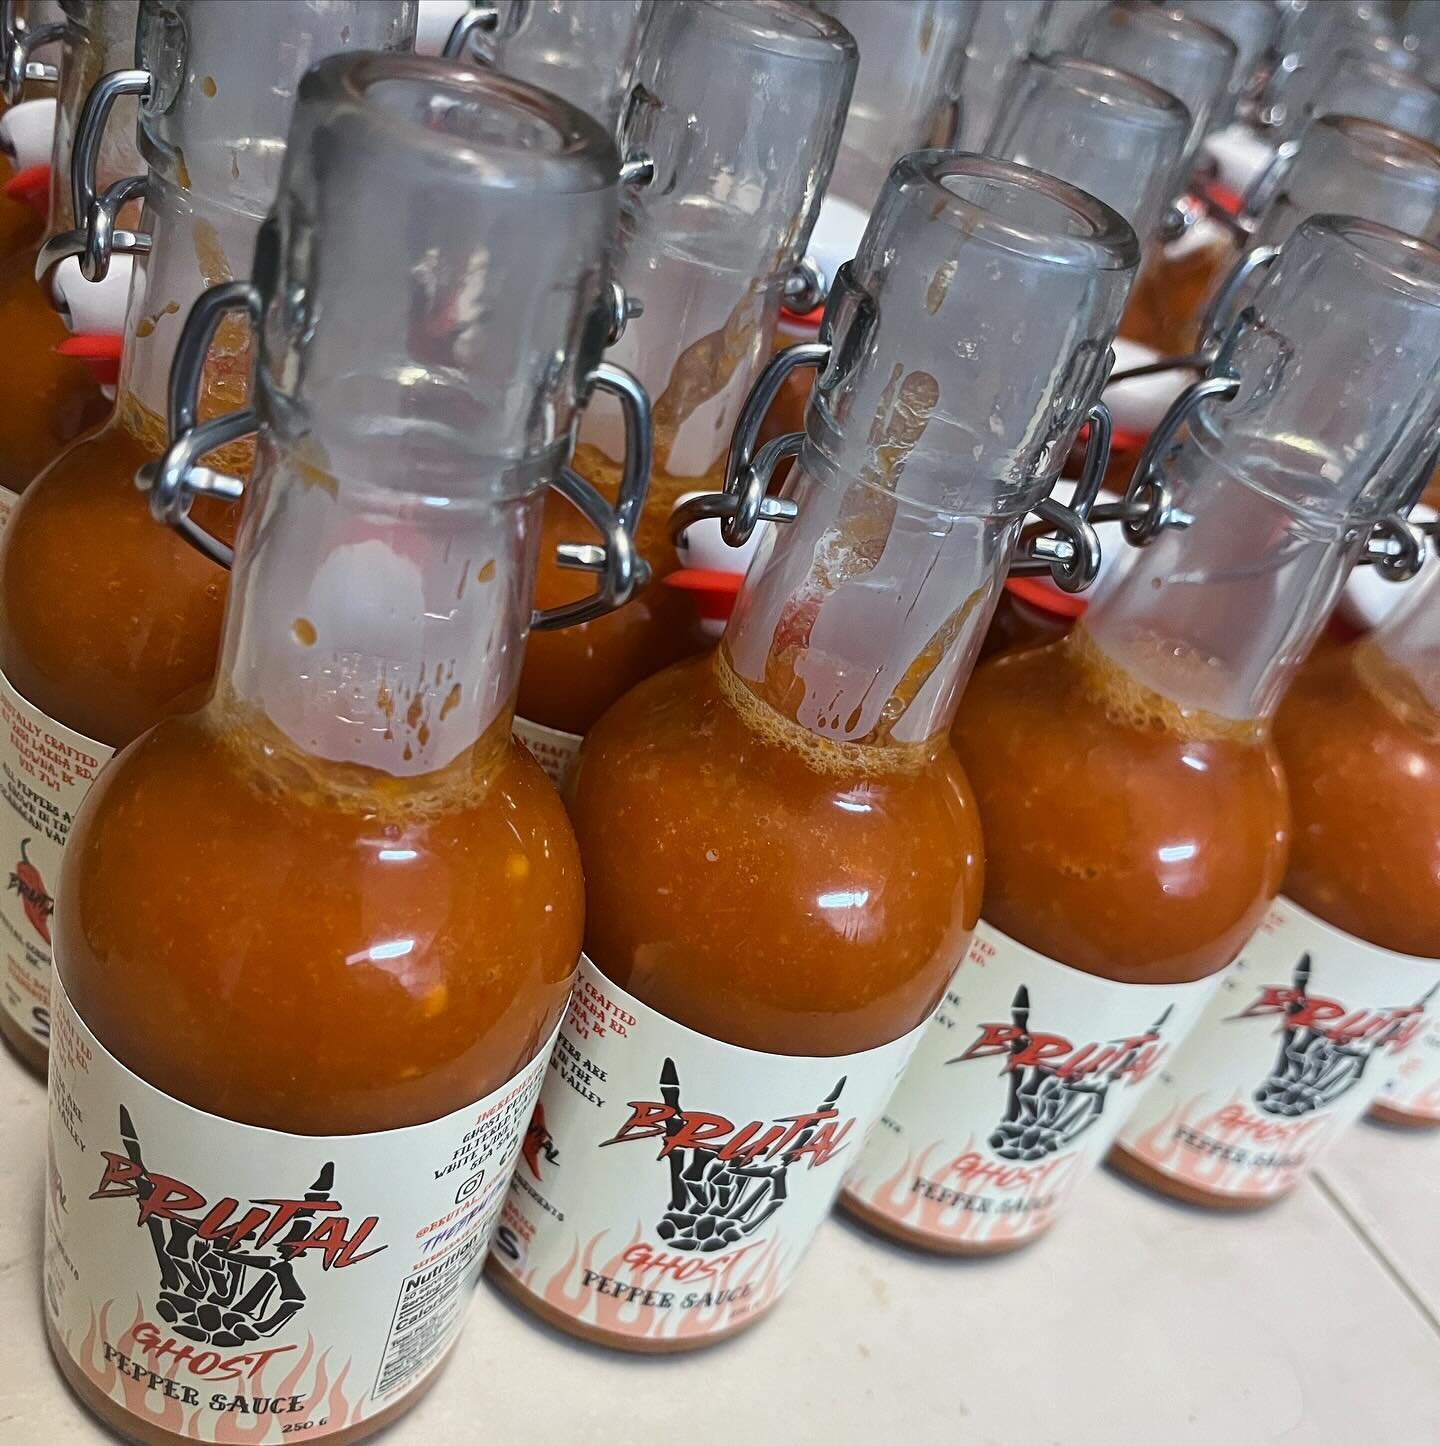 Ghost Pepper Sauce 🔥.
1 000 000 #scoville of deliciousness.  Come try it out this Saturday at the Kelowna Farmers Market 9-1pm 📍 Parkinson Rec Centre.
.
Keep it Brutal 🤘🏼 #supportlocal